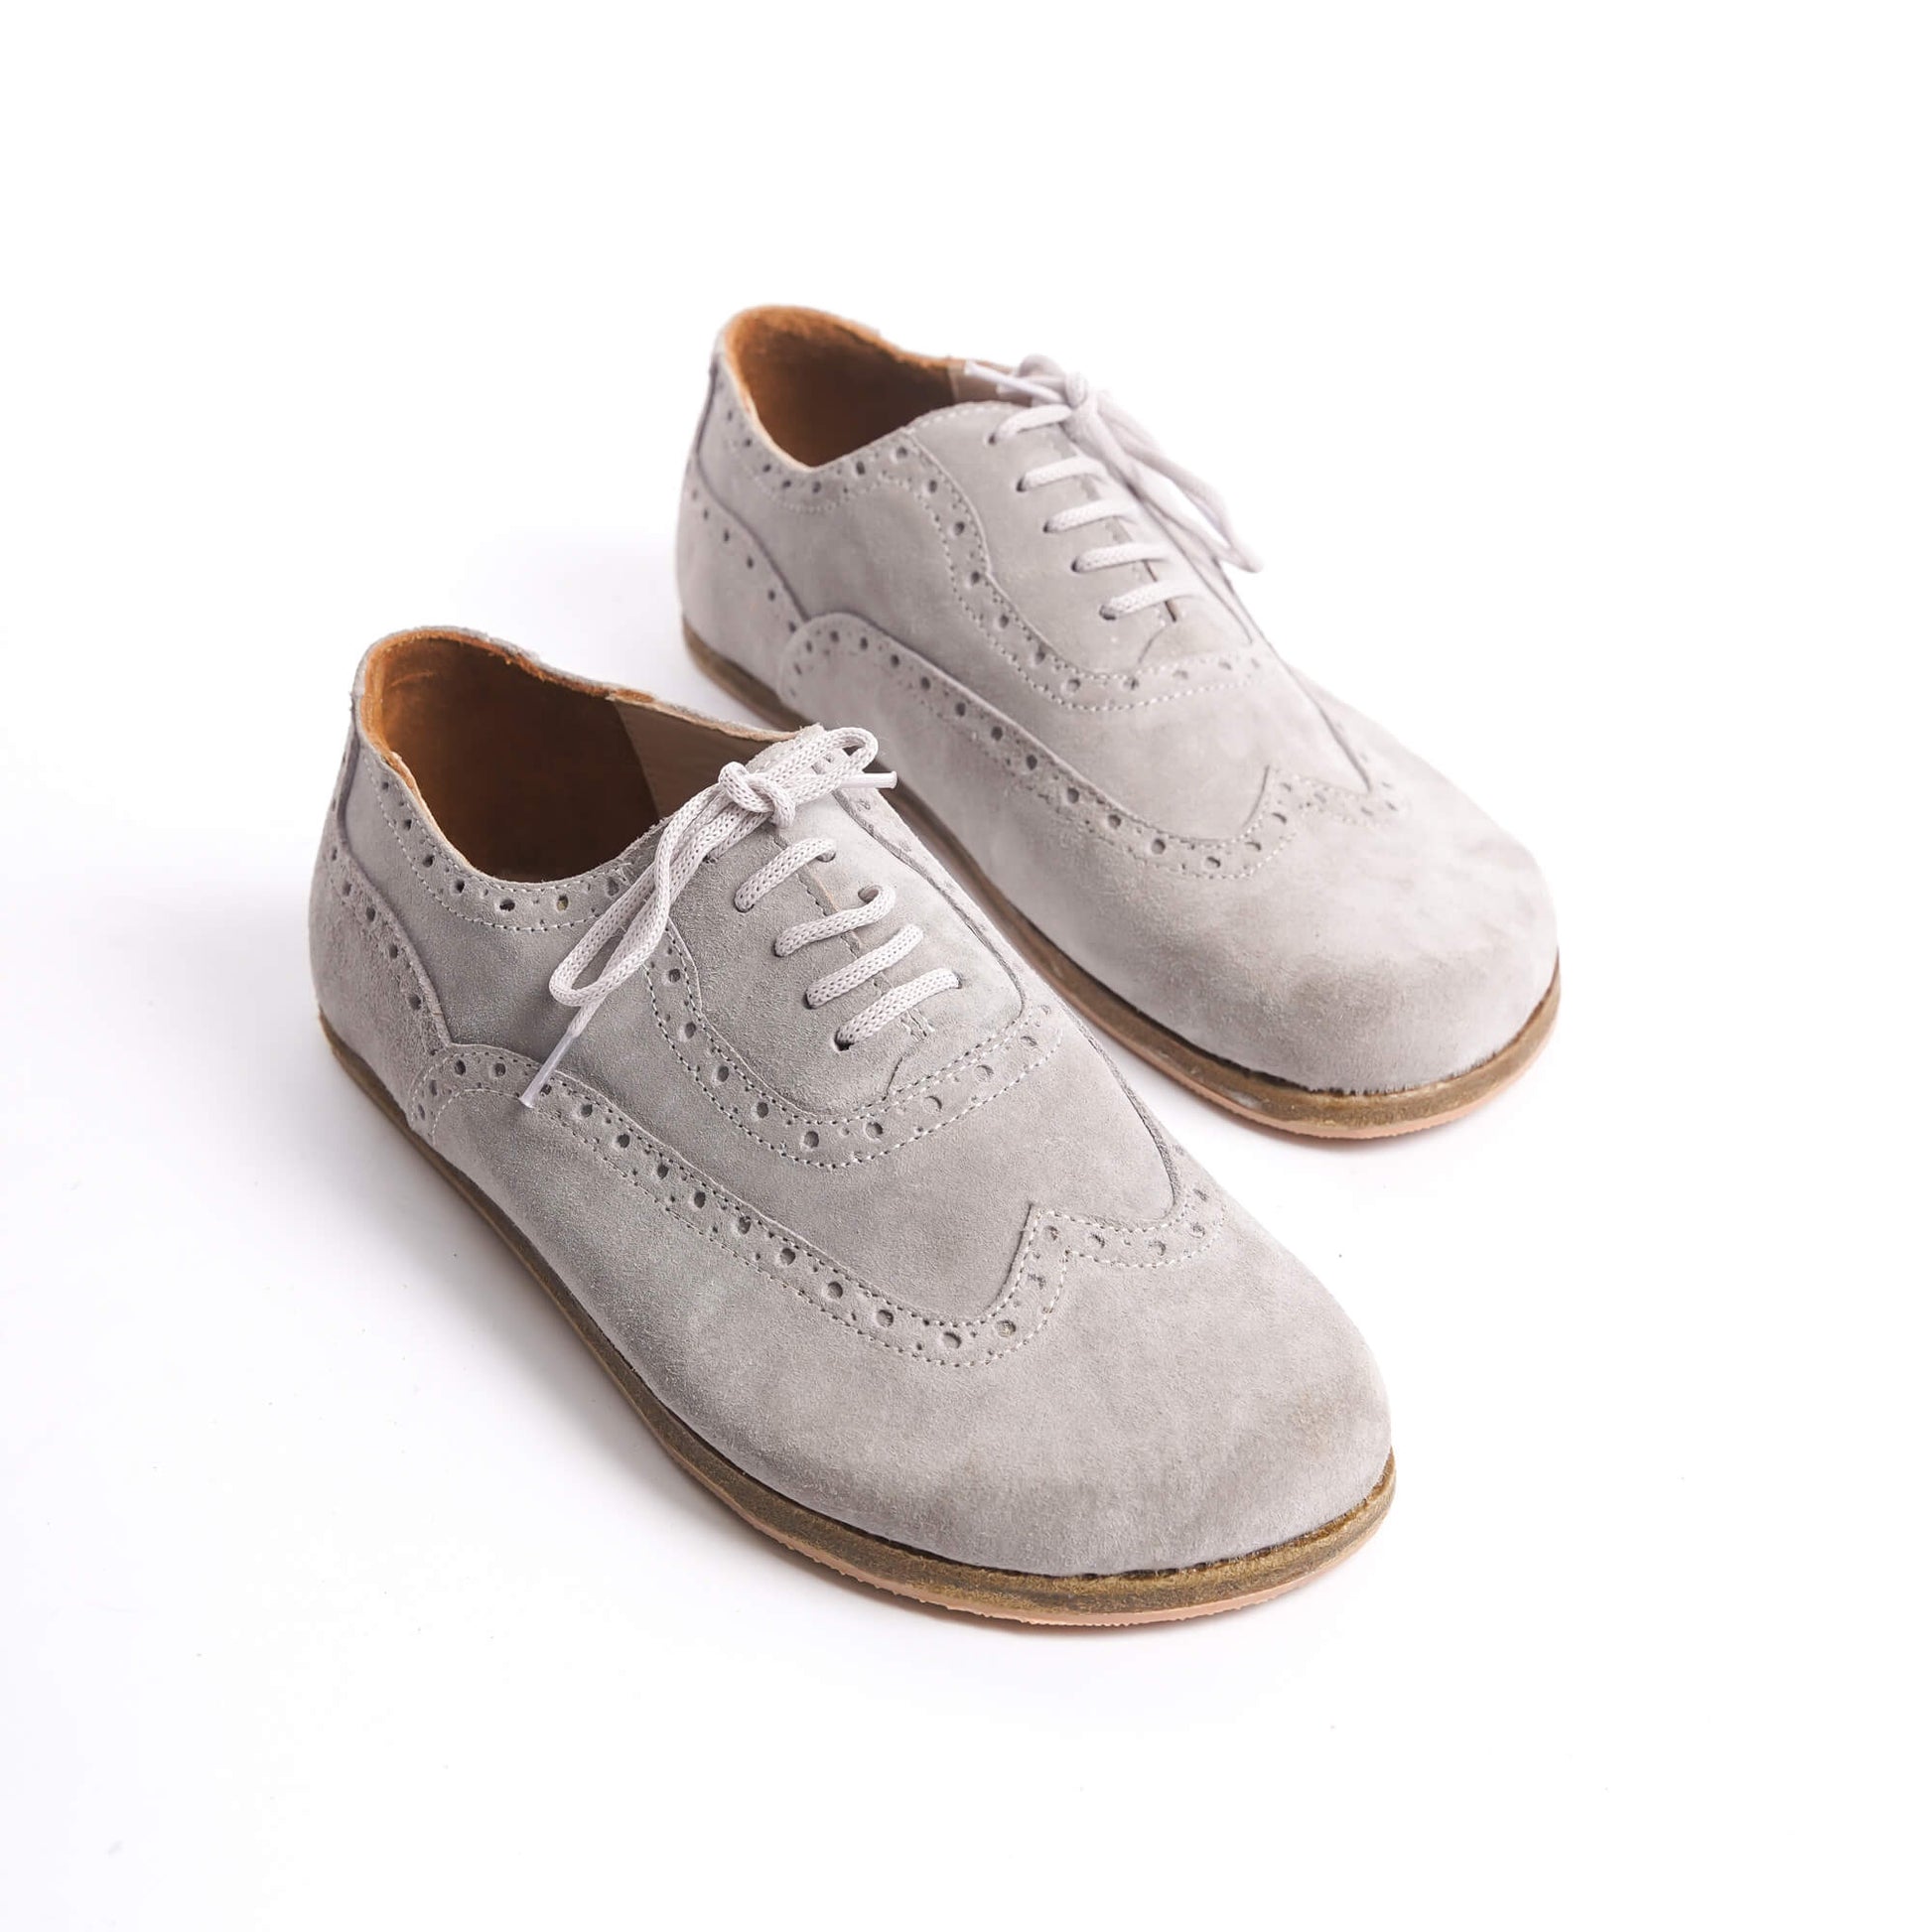 Close-up of gray Doris leather barefoot women's oxfords with lace-up design and intricate broguing details.